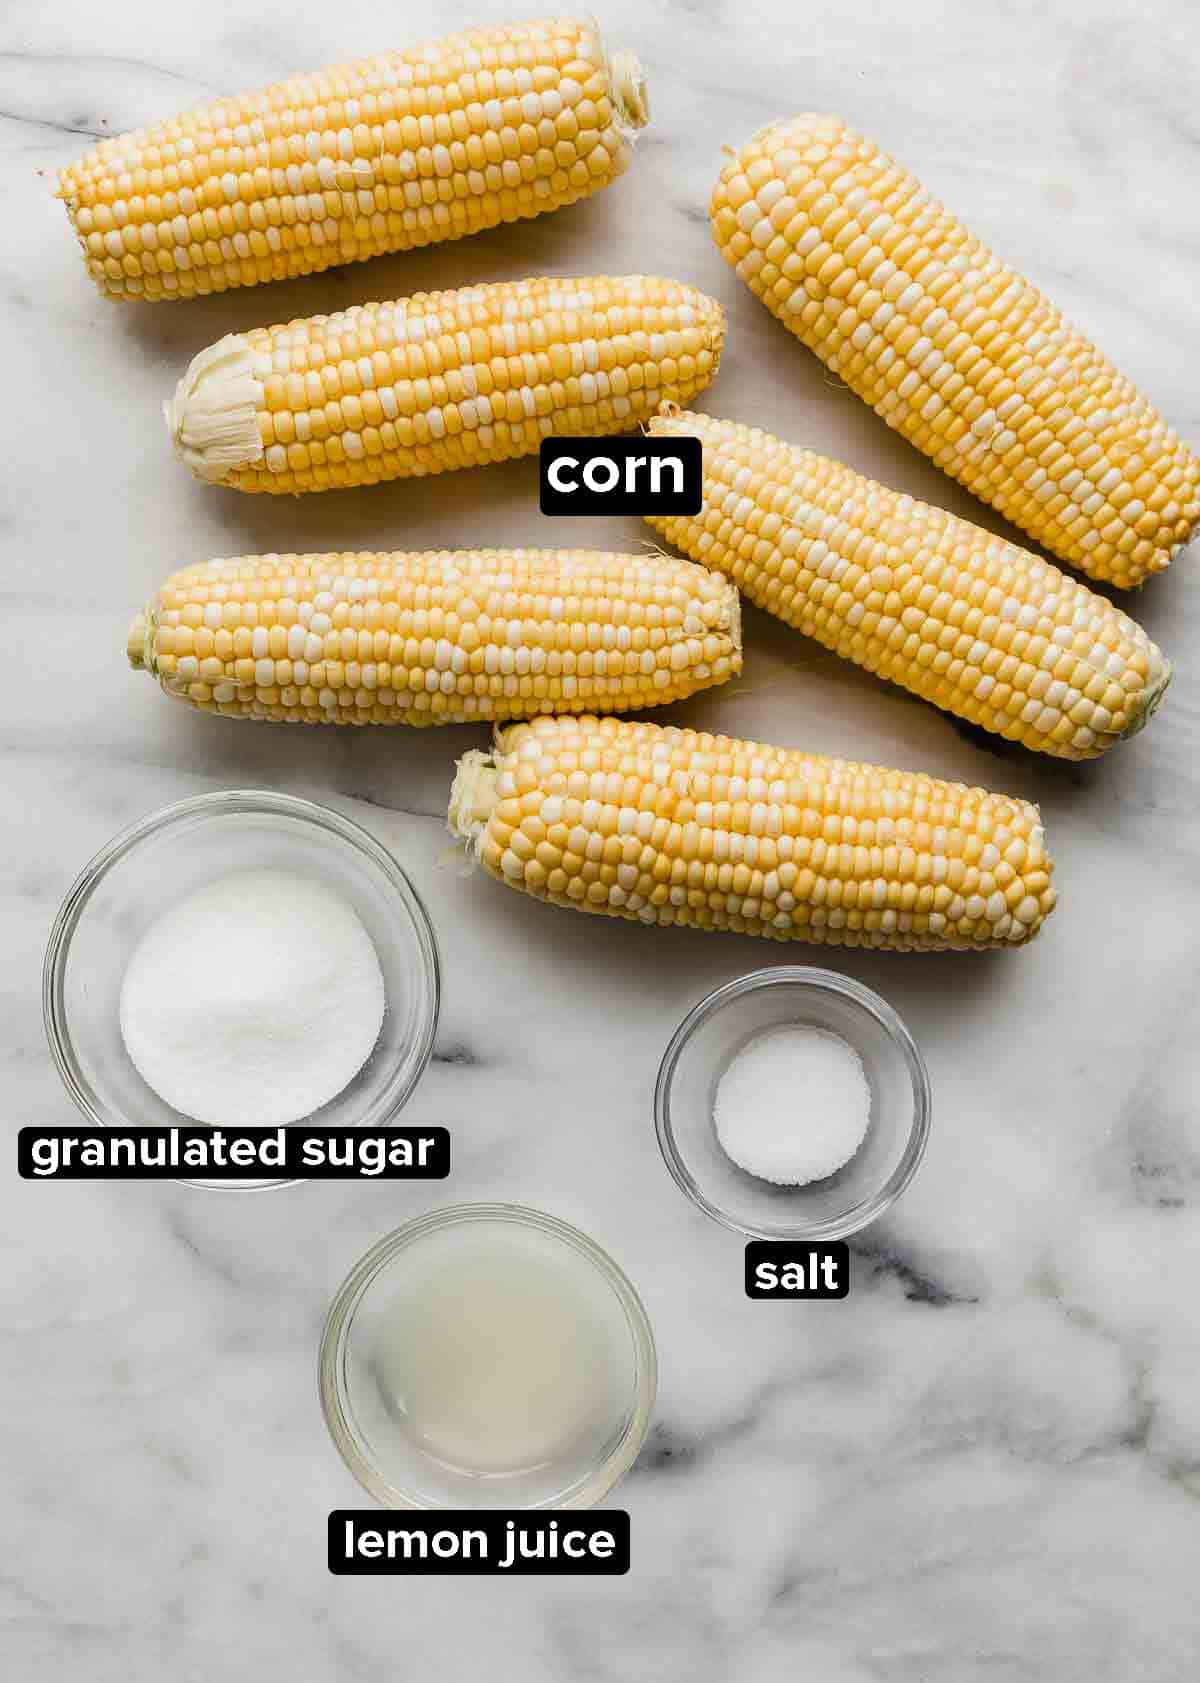 Ingredients used to make sweet boiled corn (or how to boil corn): husked raw corn on the cob, sugar, lemon juice, and salt.